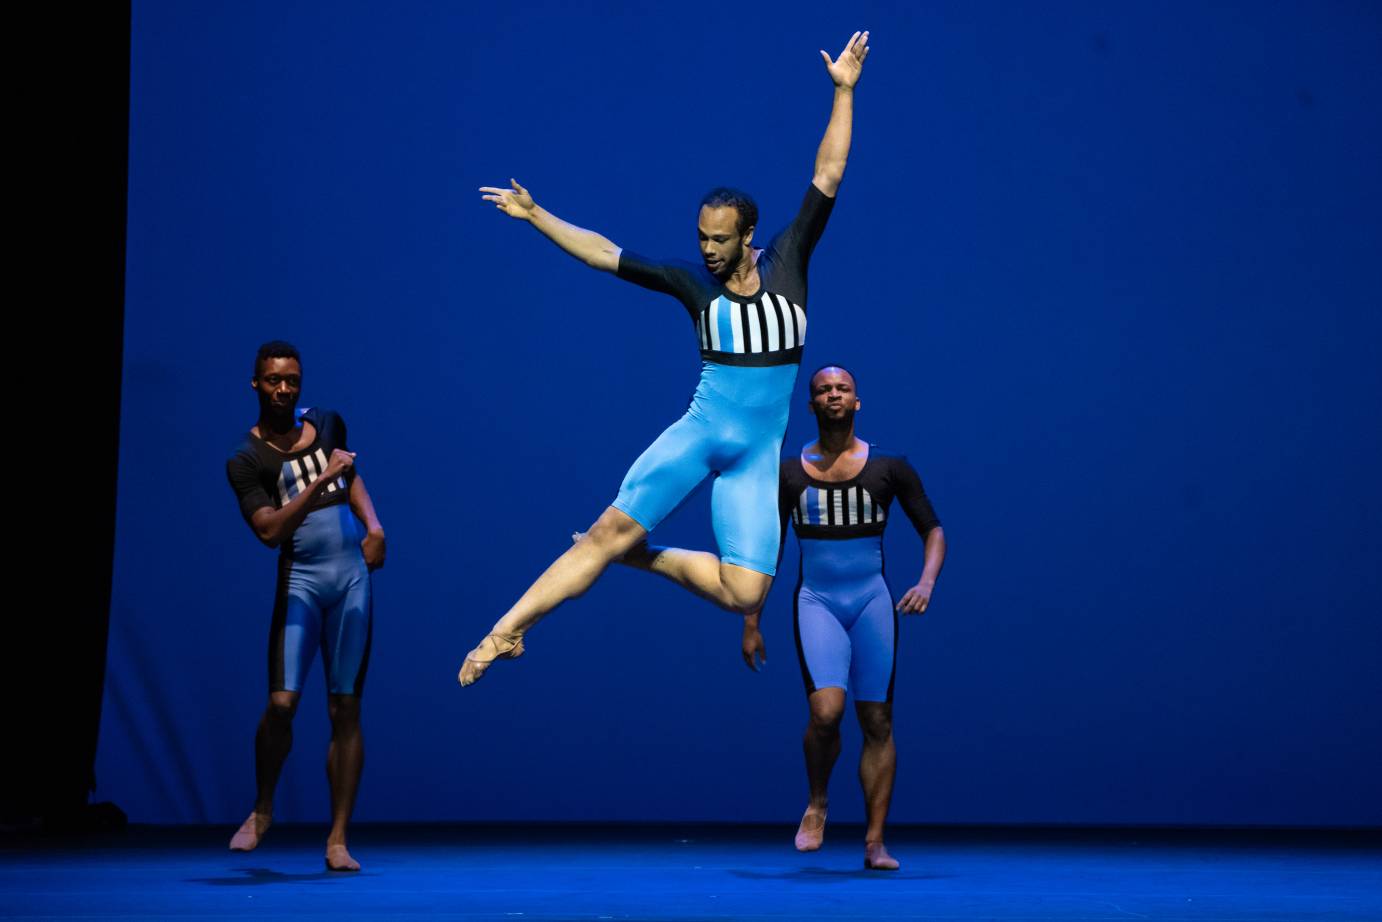 three men with dark skin dance in unitards with blue bottms and white and black striped tops... as two men in the background appear to be jogging , one man in the center jumps up in front of them